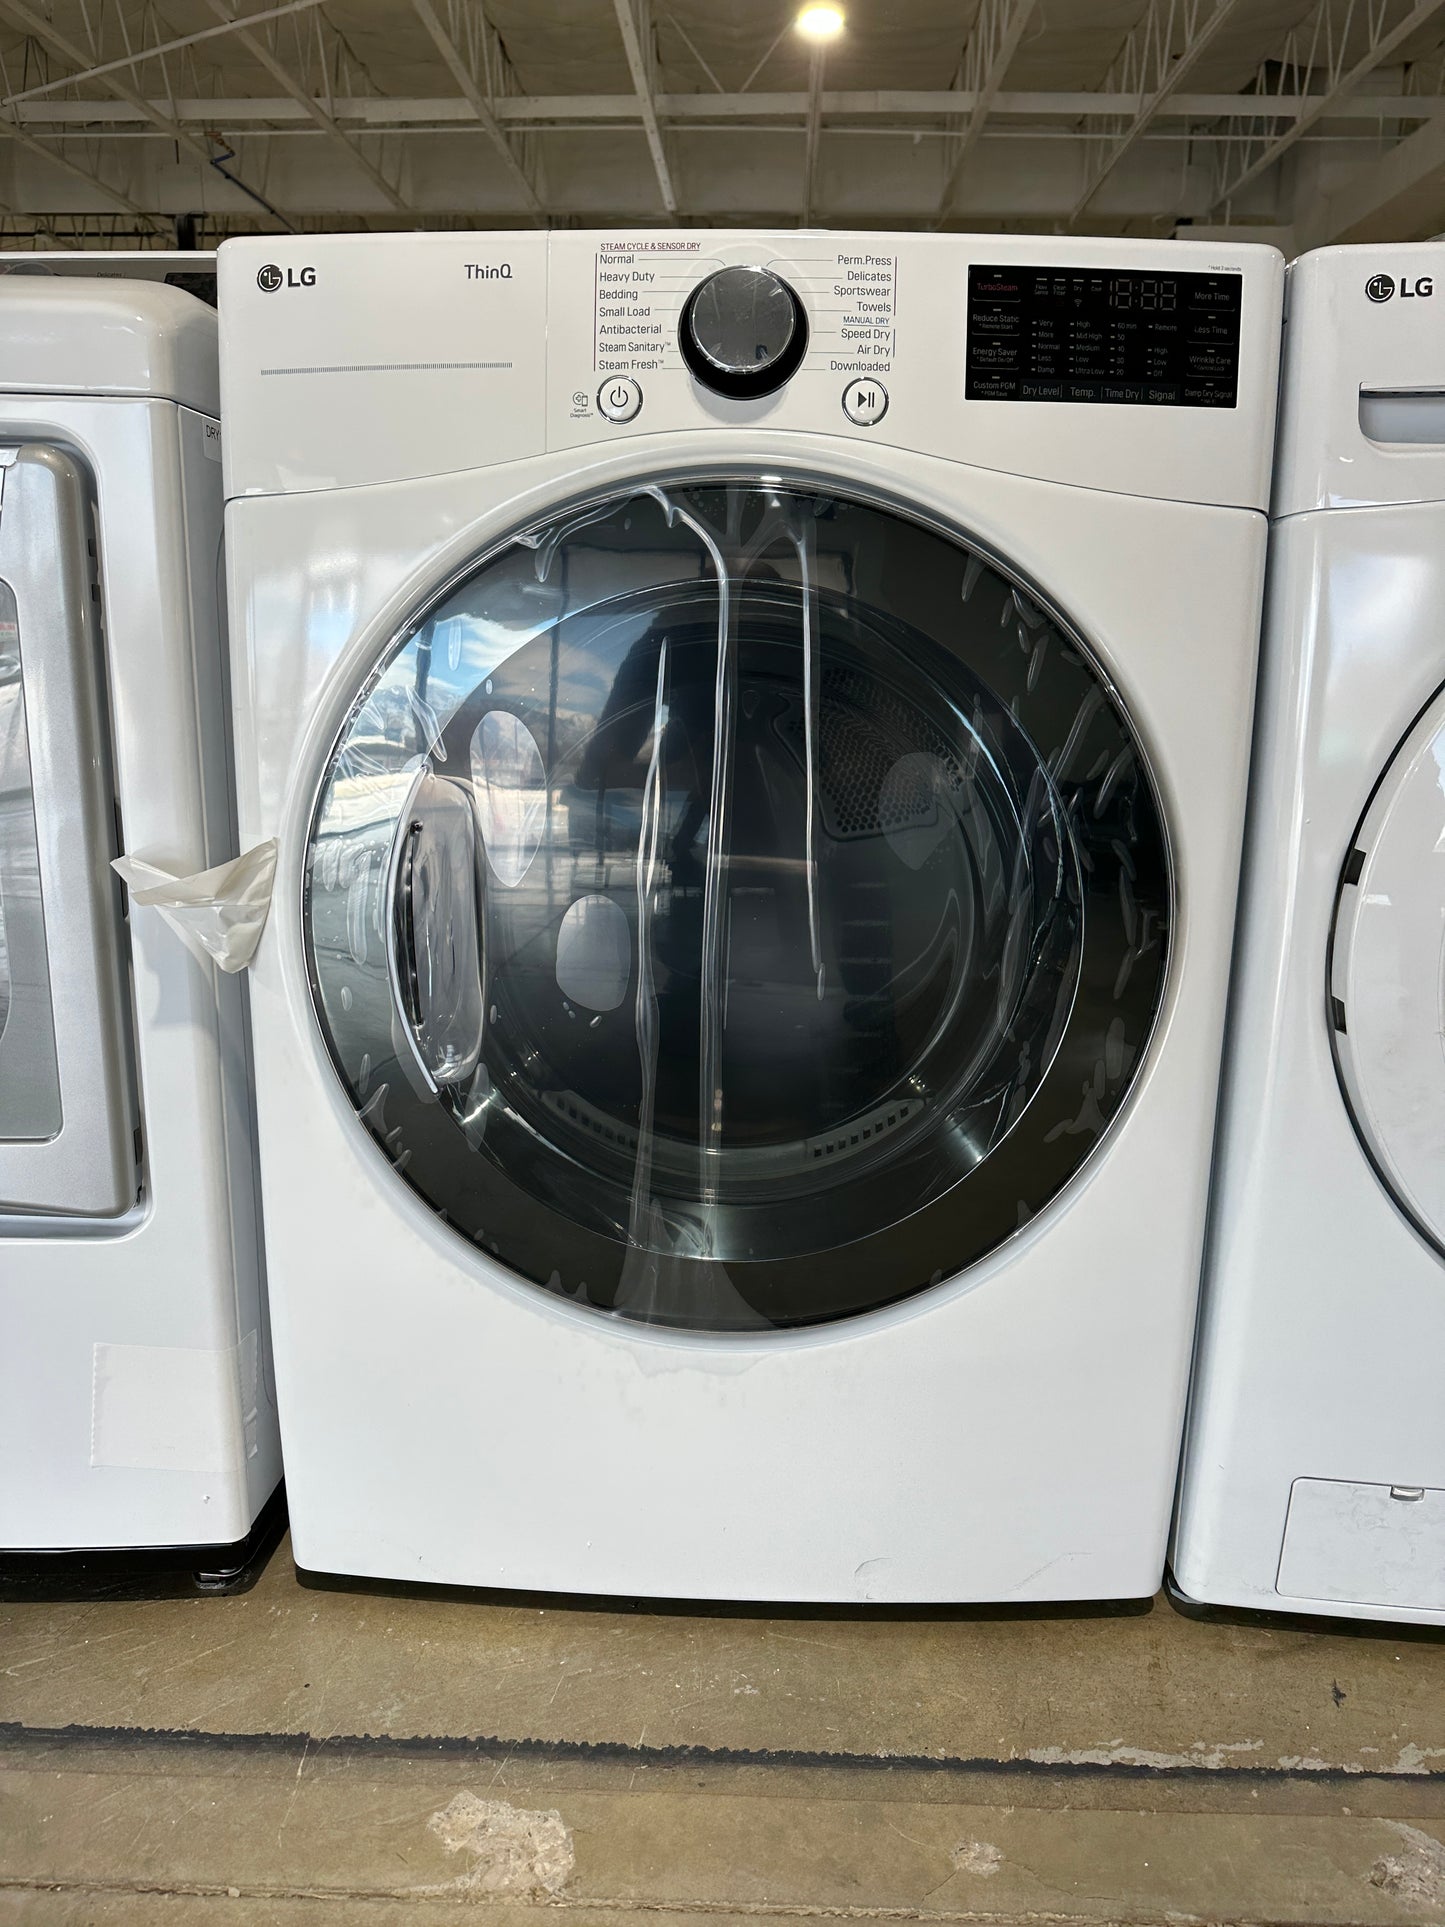 GREAT NEW LG DRYER WITH STEAM AND SENSOR DRY - DRY11706S DLEX3900W